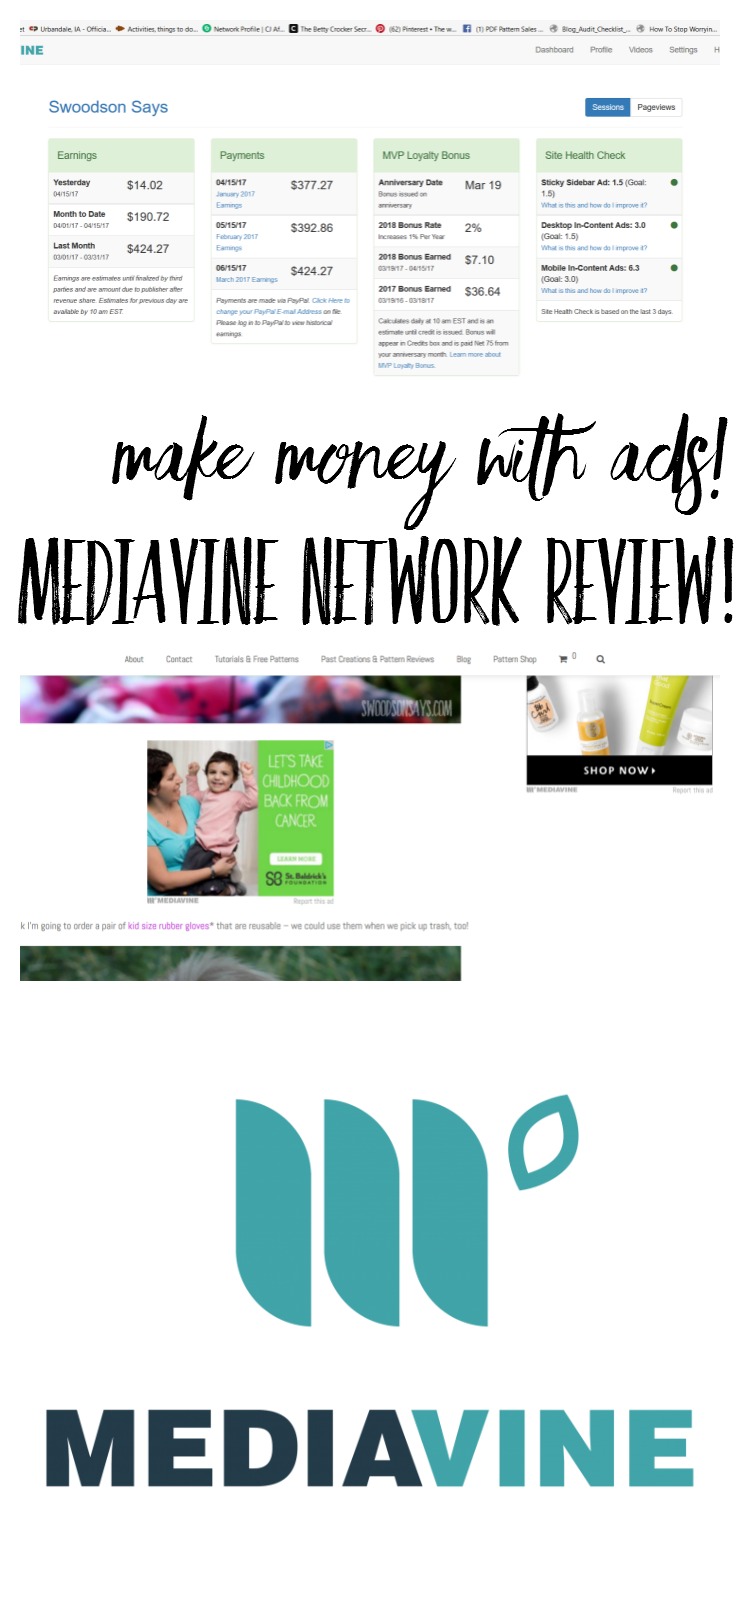 Why you should be working with Mediavine Publisher Network! I tripled my income switching from Adsense - read more about making money from ads for your blog!